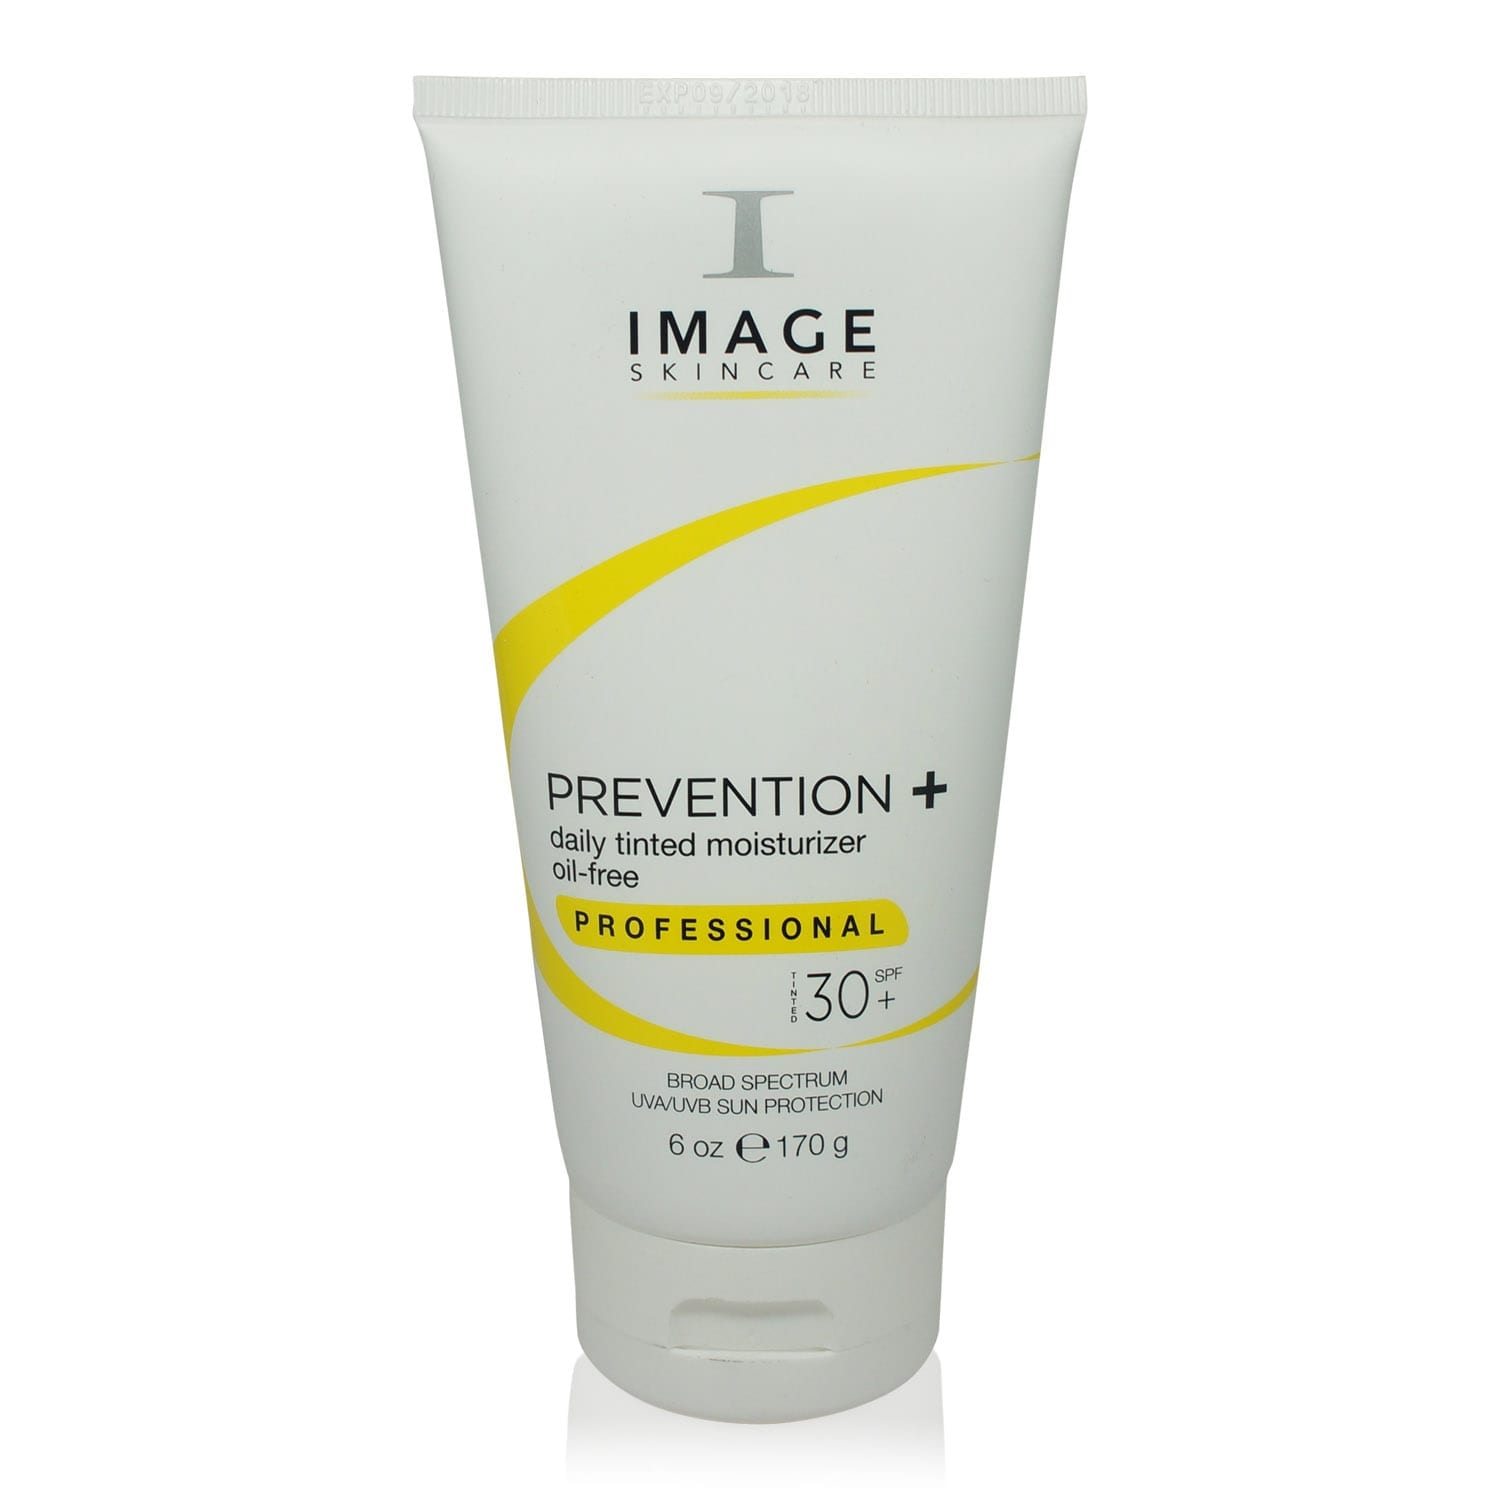 IMAGE Skincare Prevention Plus Daily Tinted Oil Free SPF 30